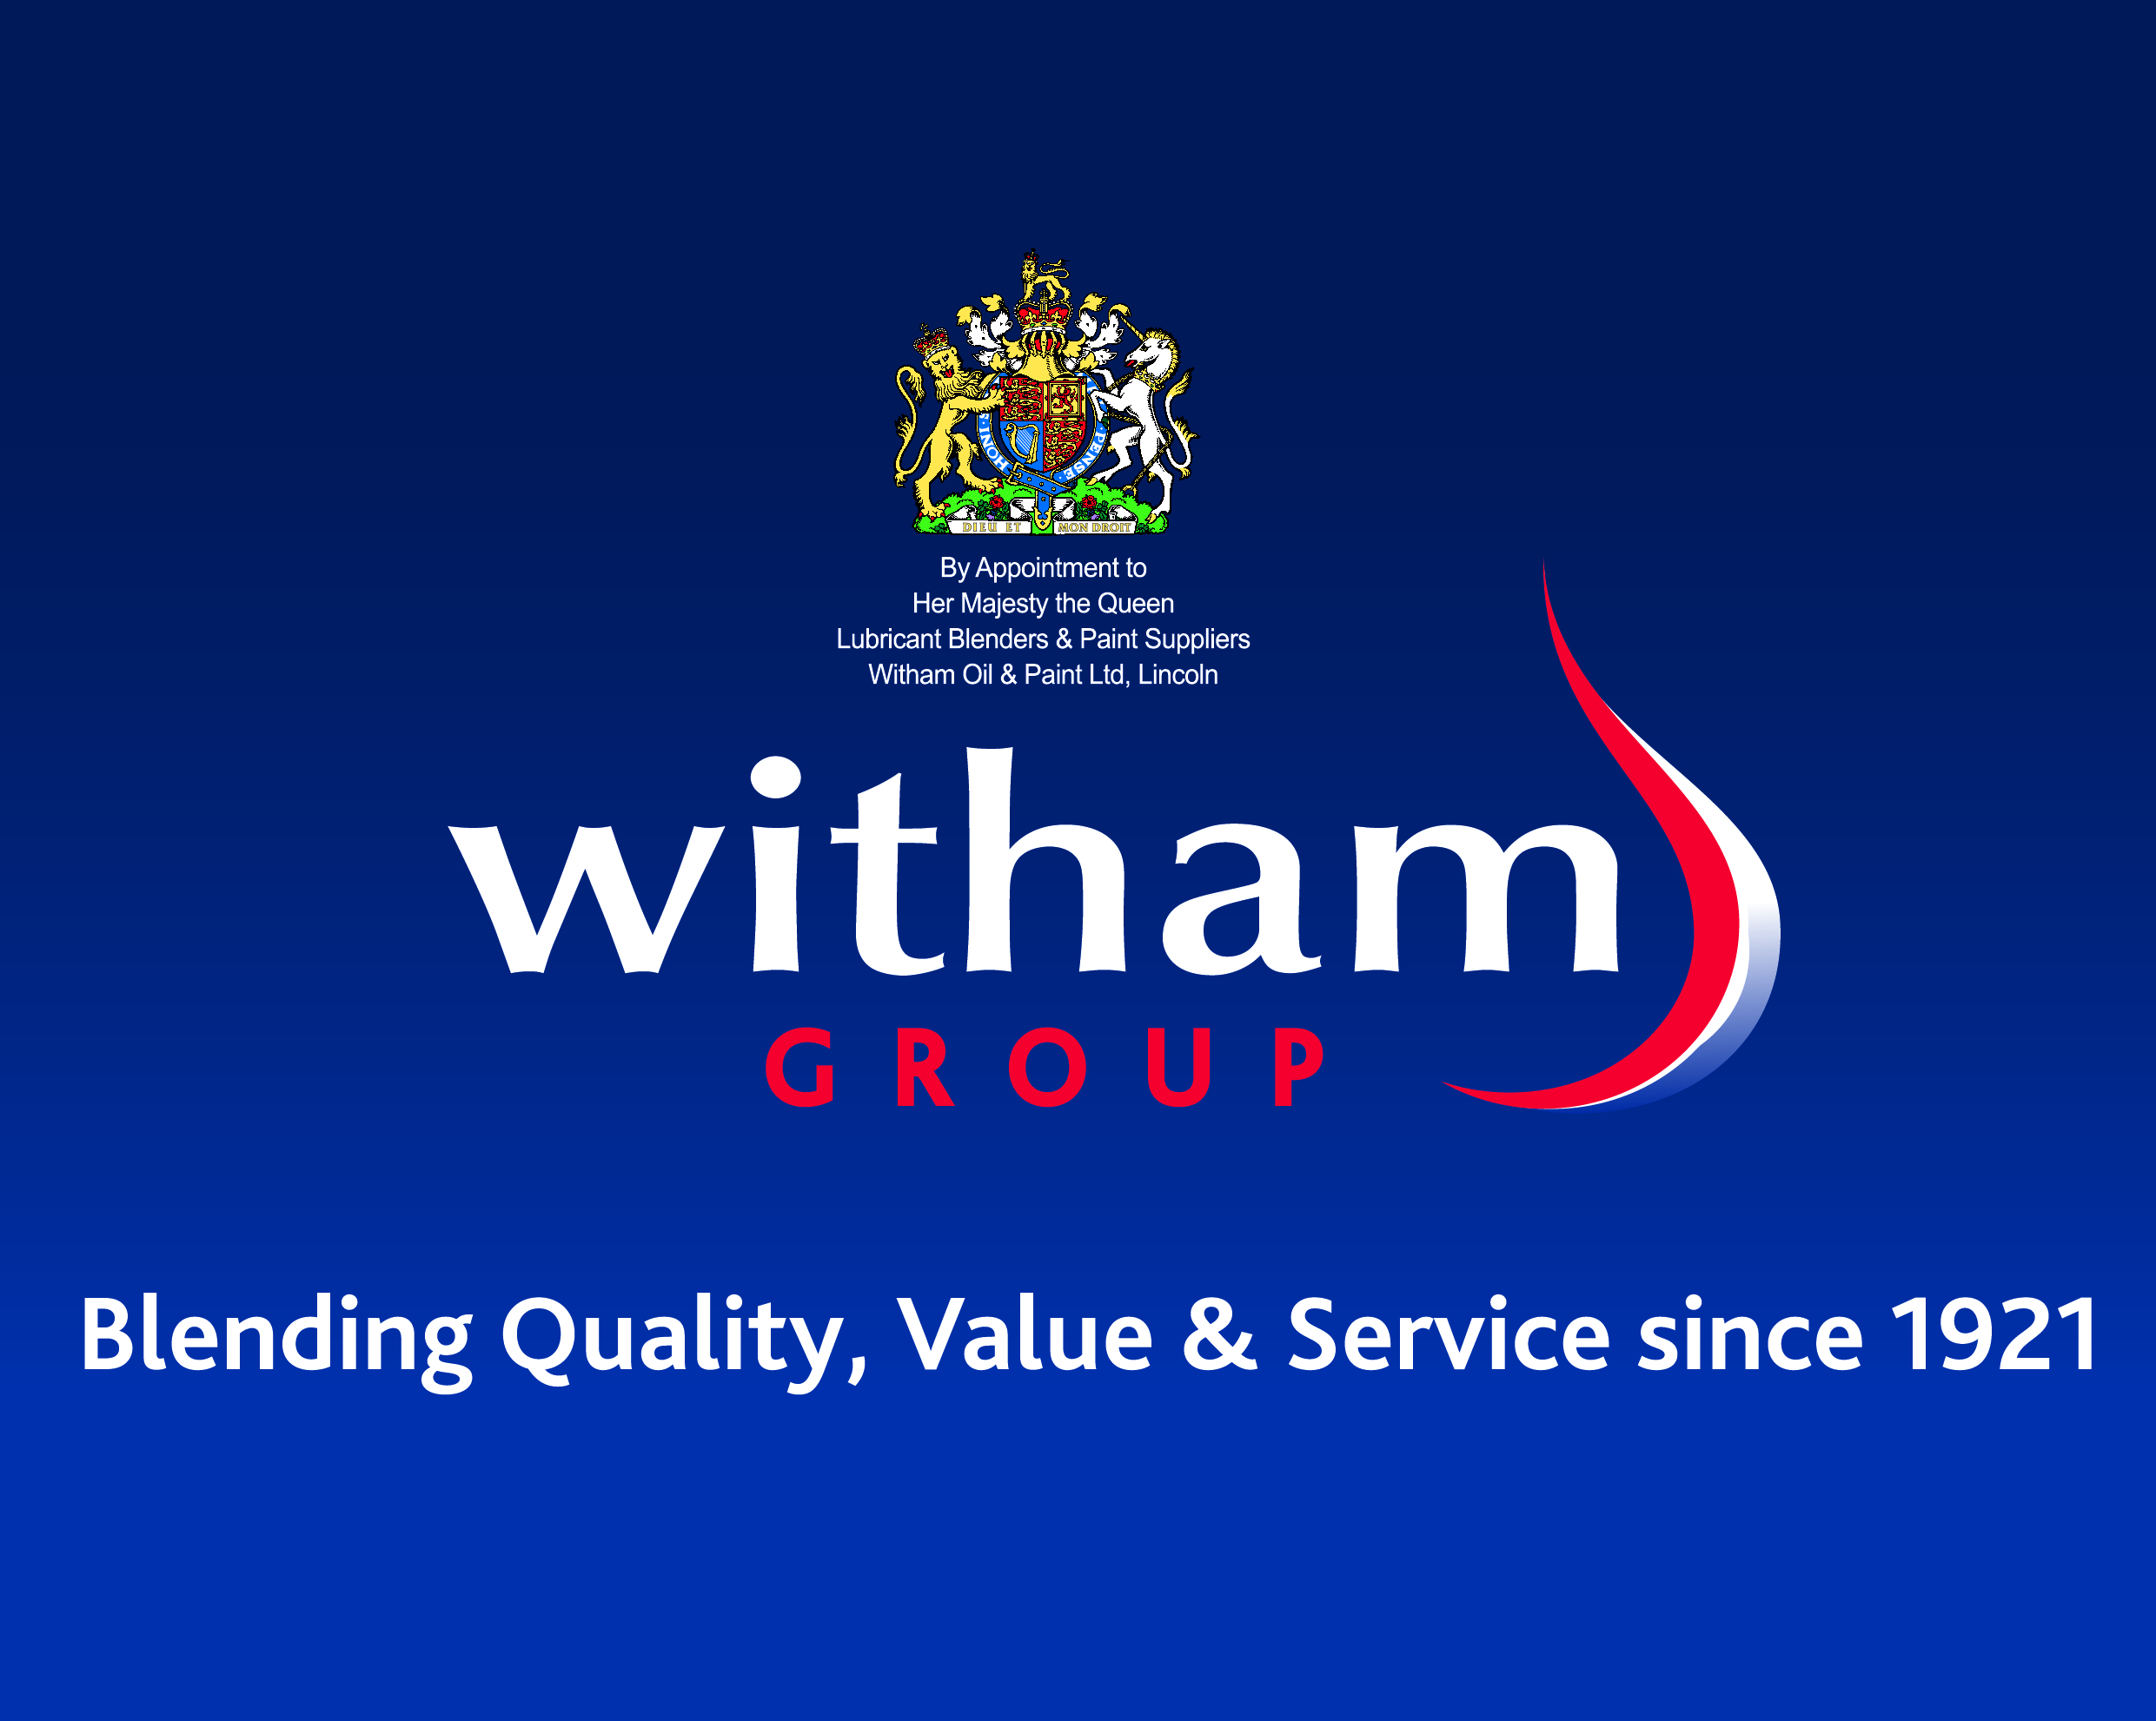 WITHAM GROUP